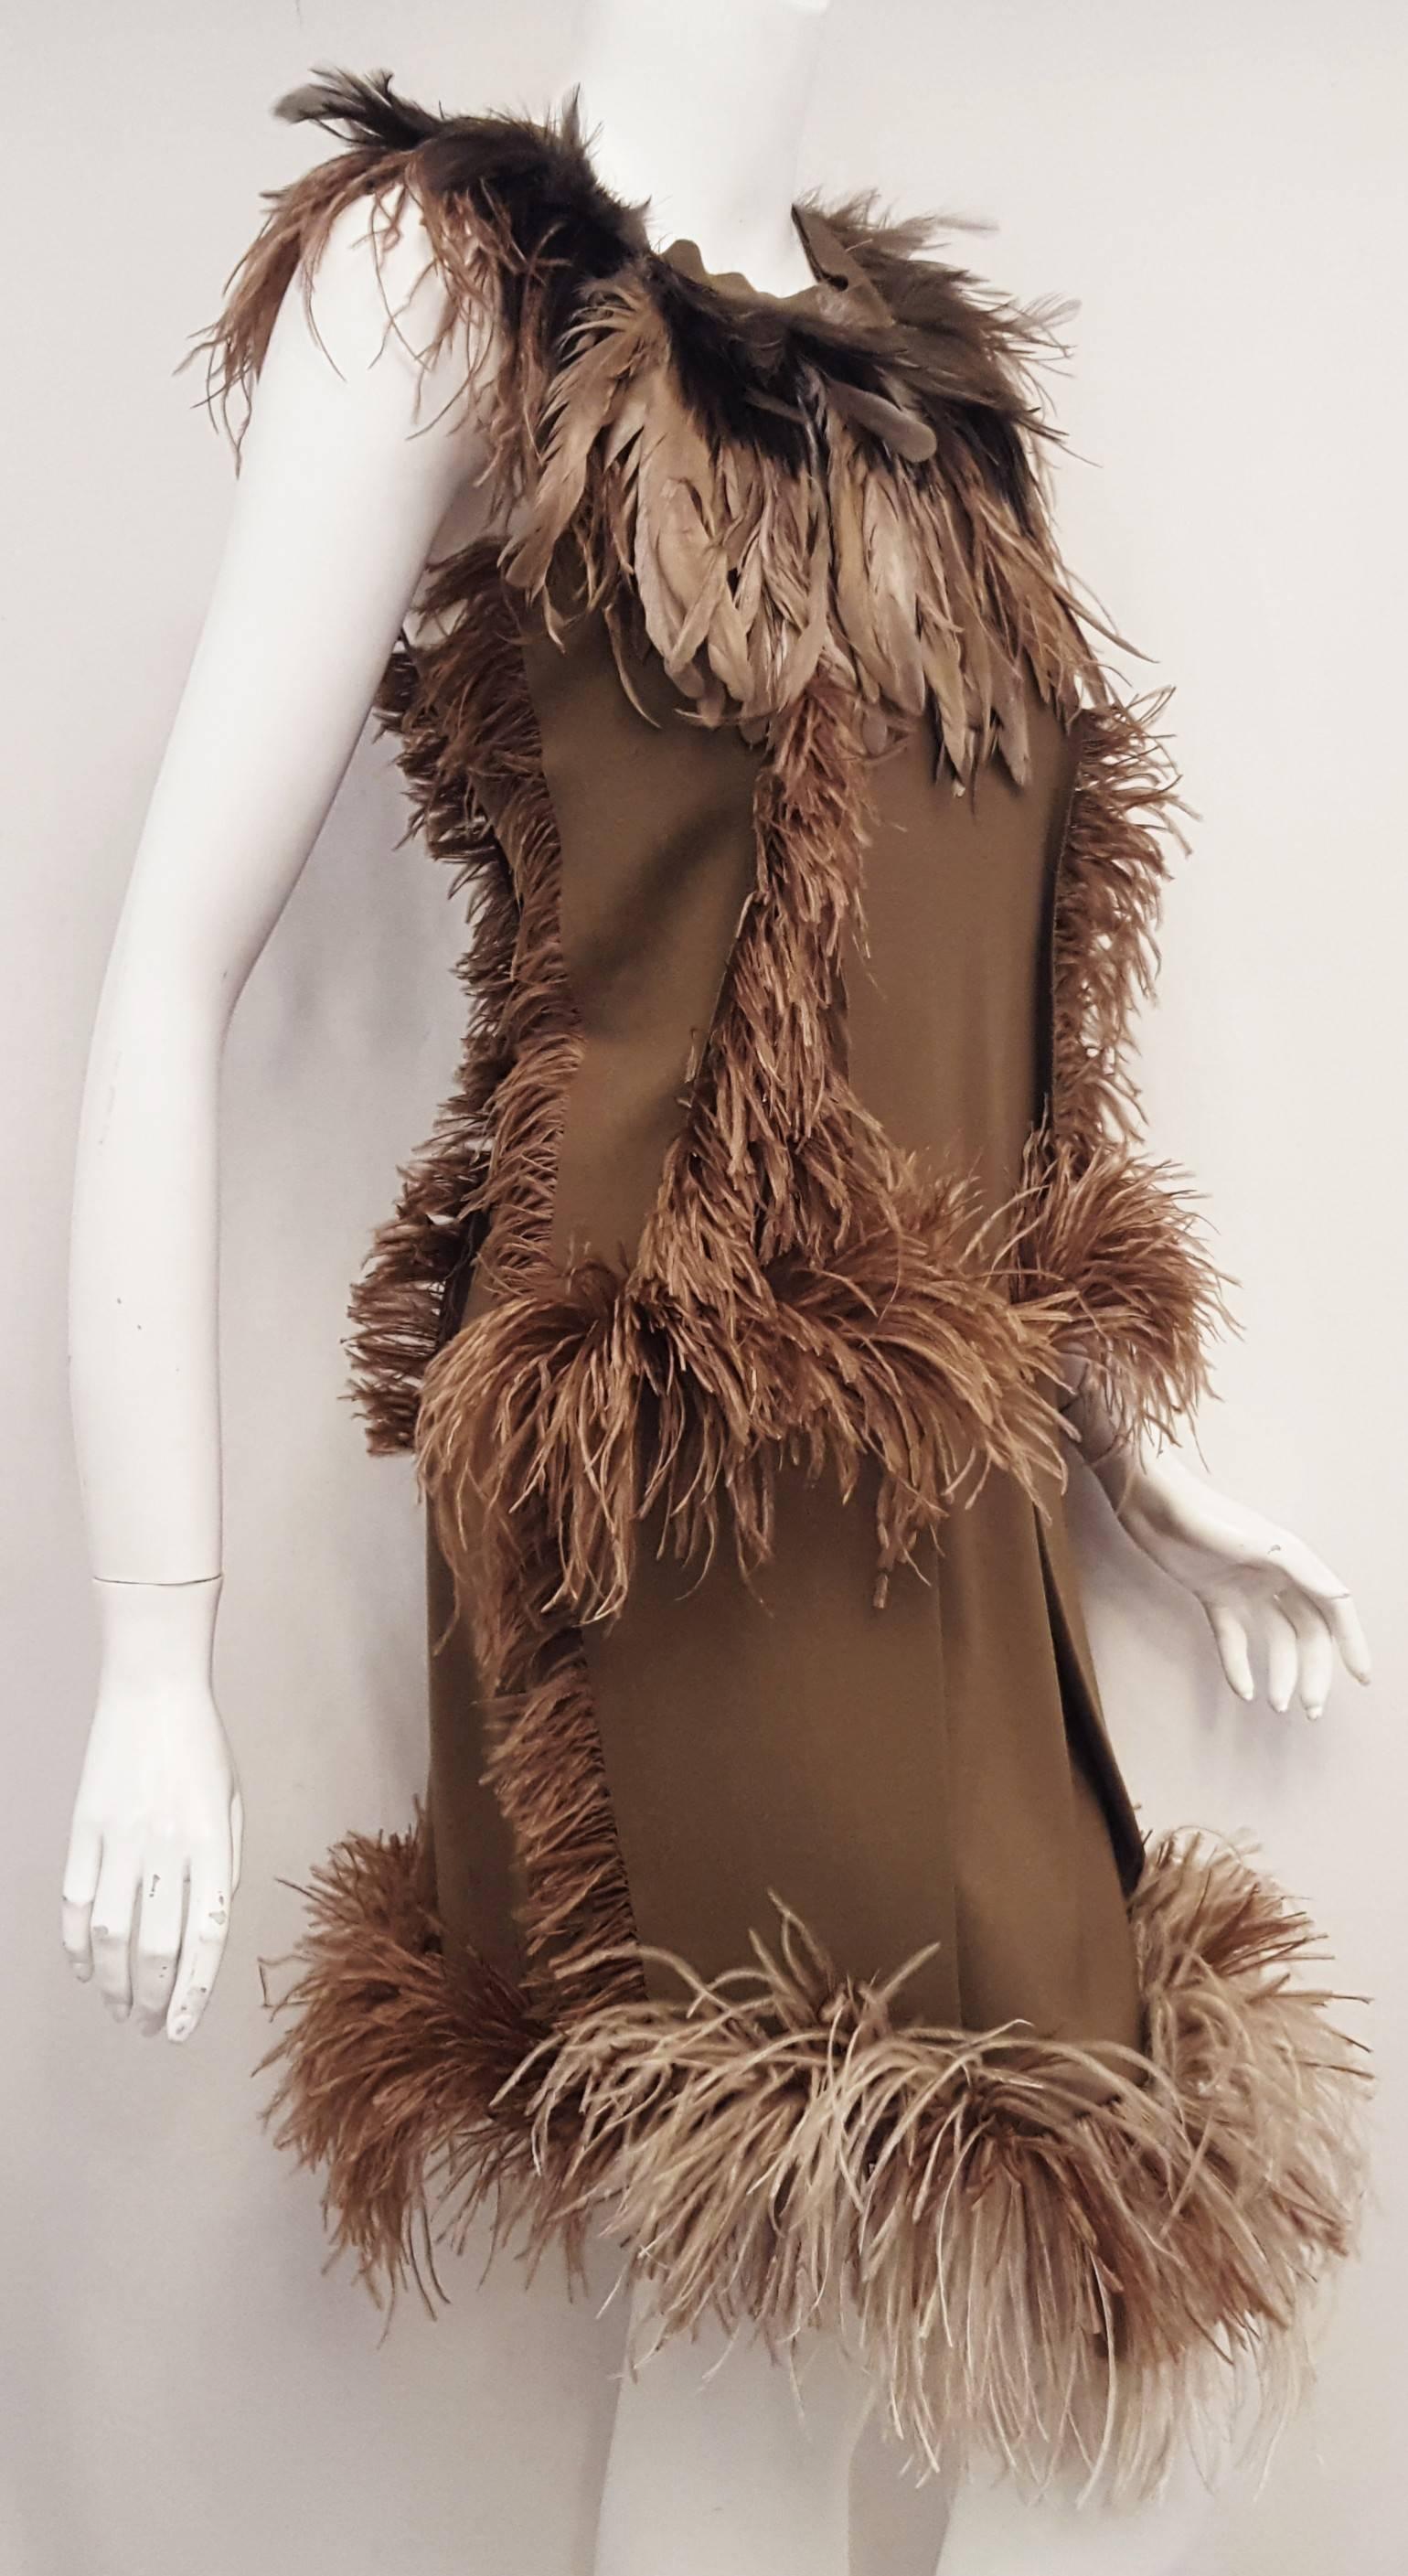 Lanvin's ostrich feather Hiver/Winter 2010 runway dress with claudine or round collar is created totally inside out.  Sleeveless dress has all the seams on the outside with the excess fabric on display.  Even the zipper is showing in this whimsical